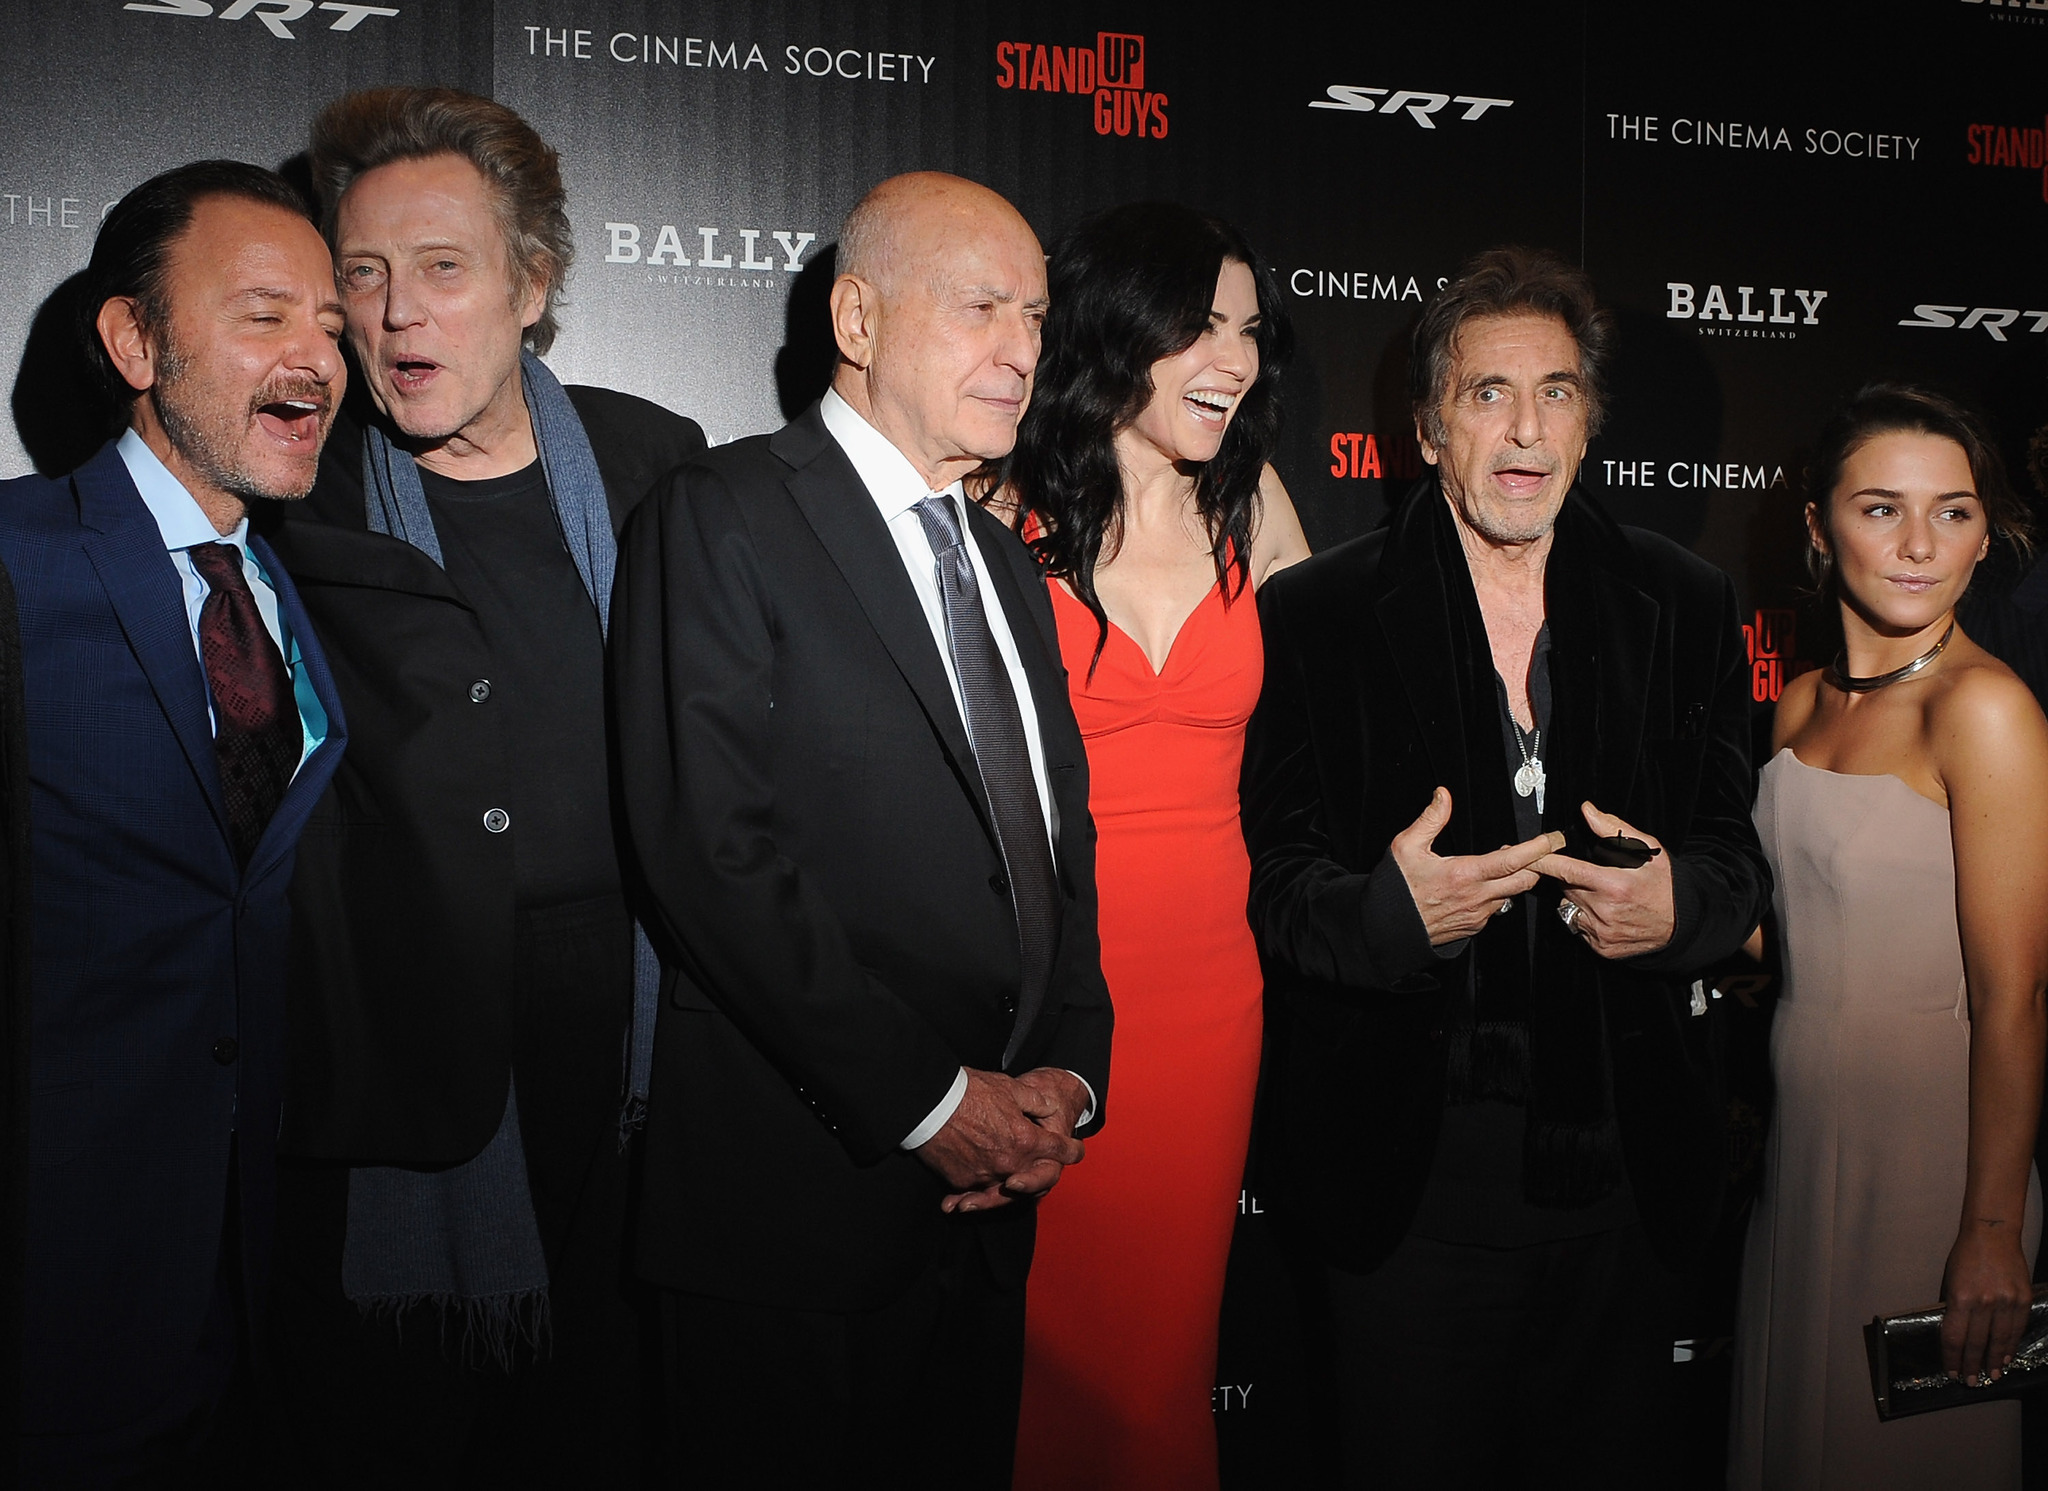 Al Pacino, Alan Arkin, Julianna Margulies, Christopher Walken, Fisher Stevens and Addison Timlin at event of Stand Up Guys (2012)